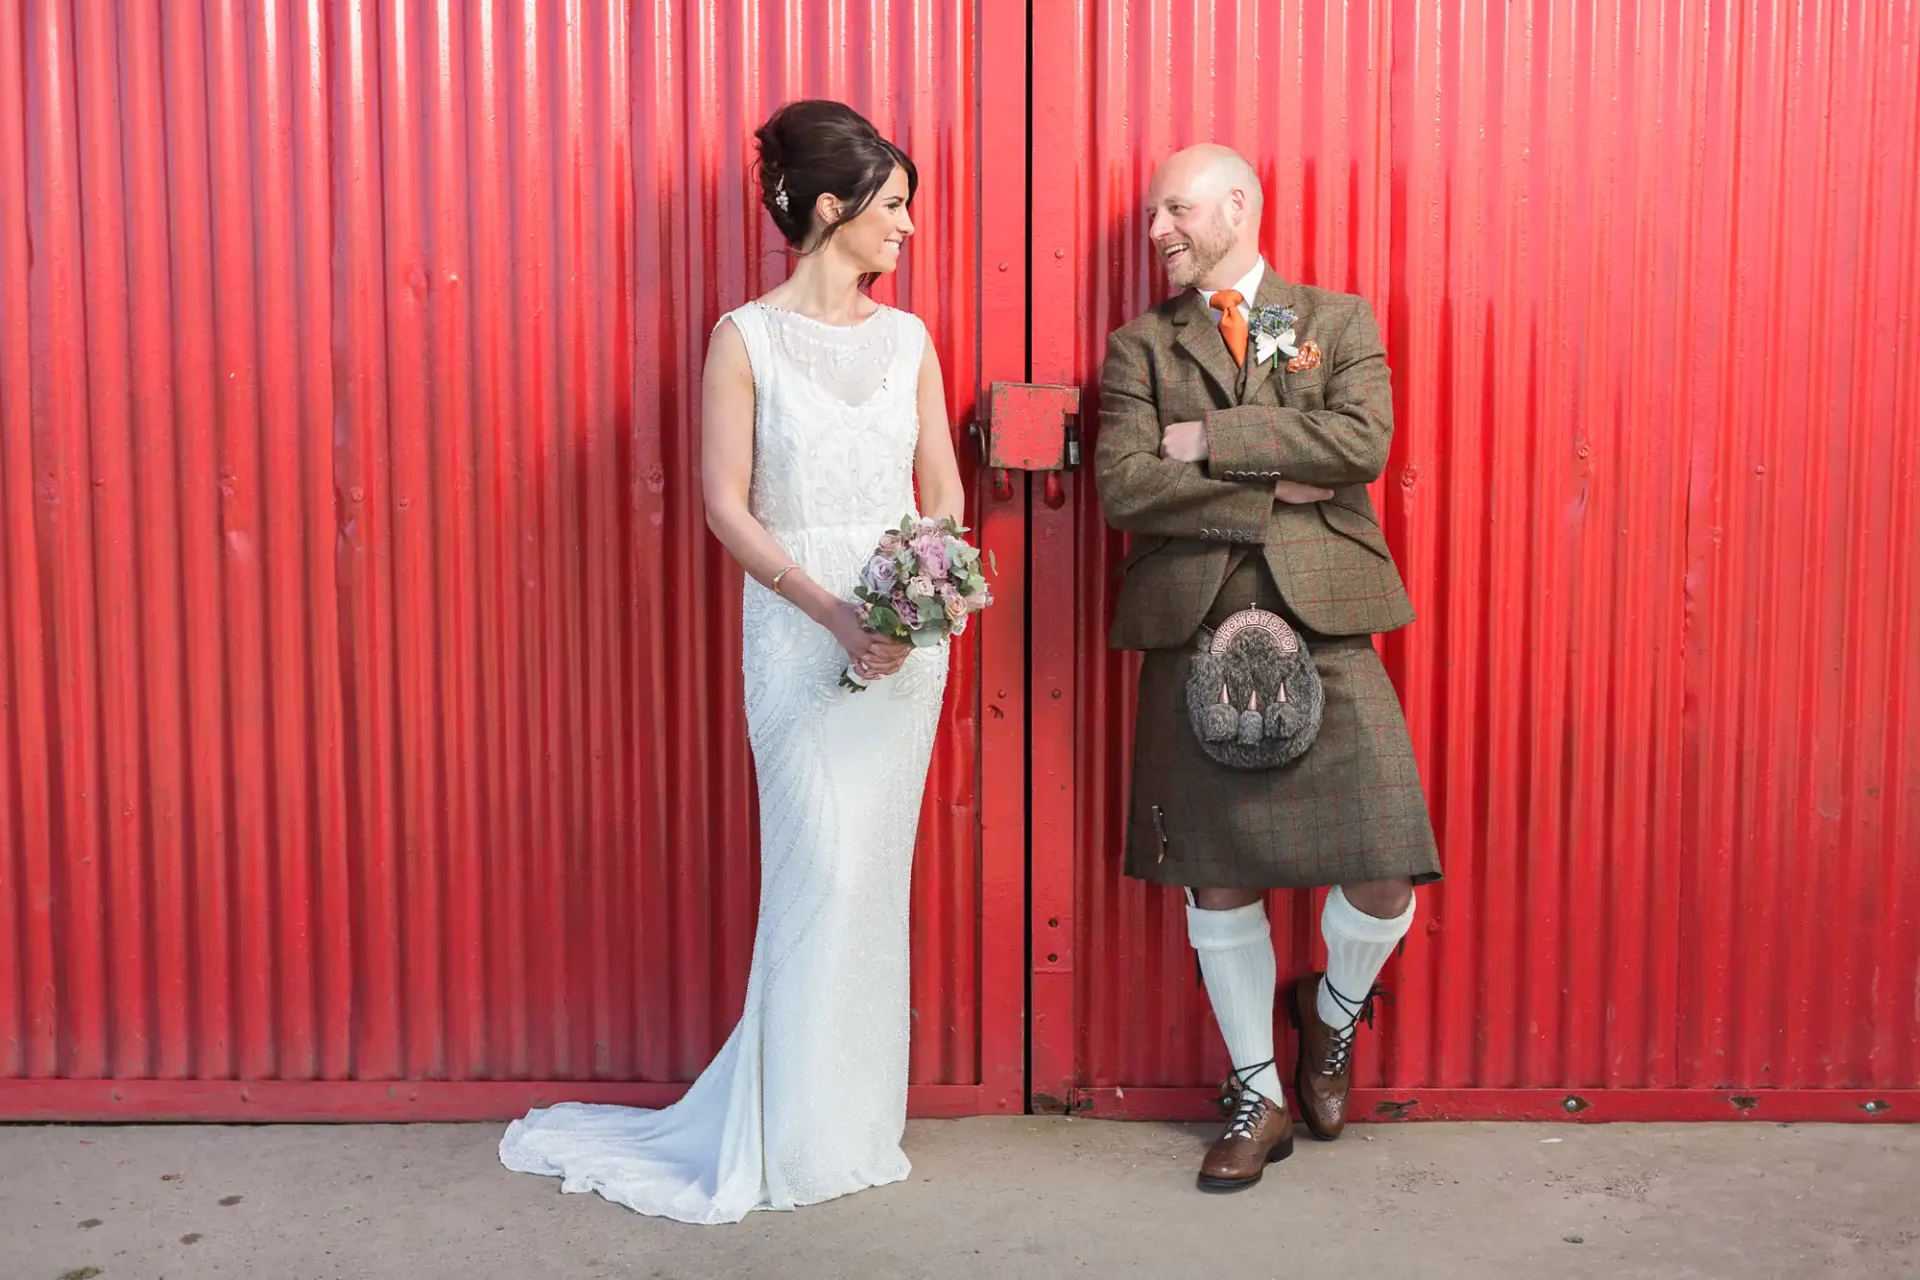 A bride in a white dress and a groom in a kilt sharing a cheerful moment against a vibrant red background.